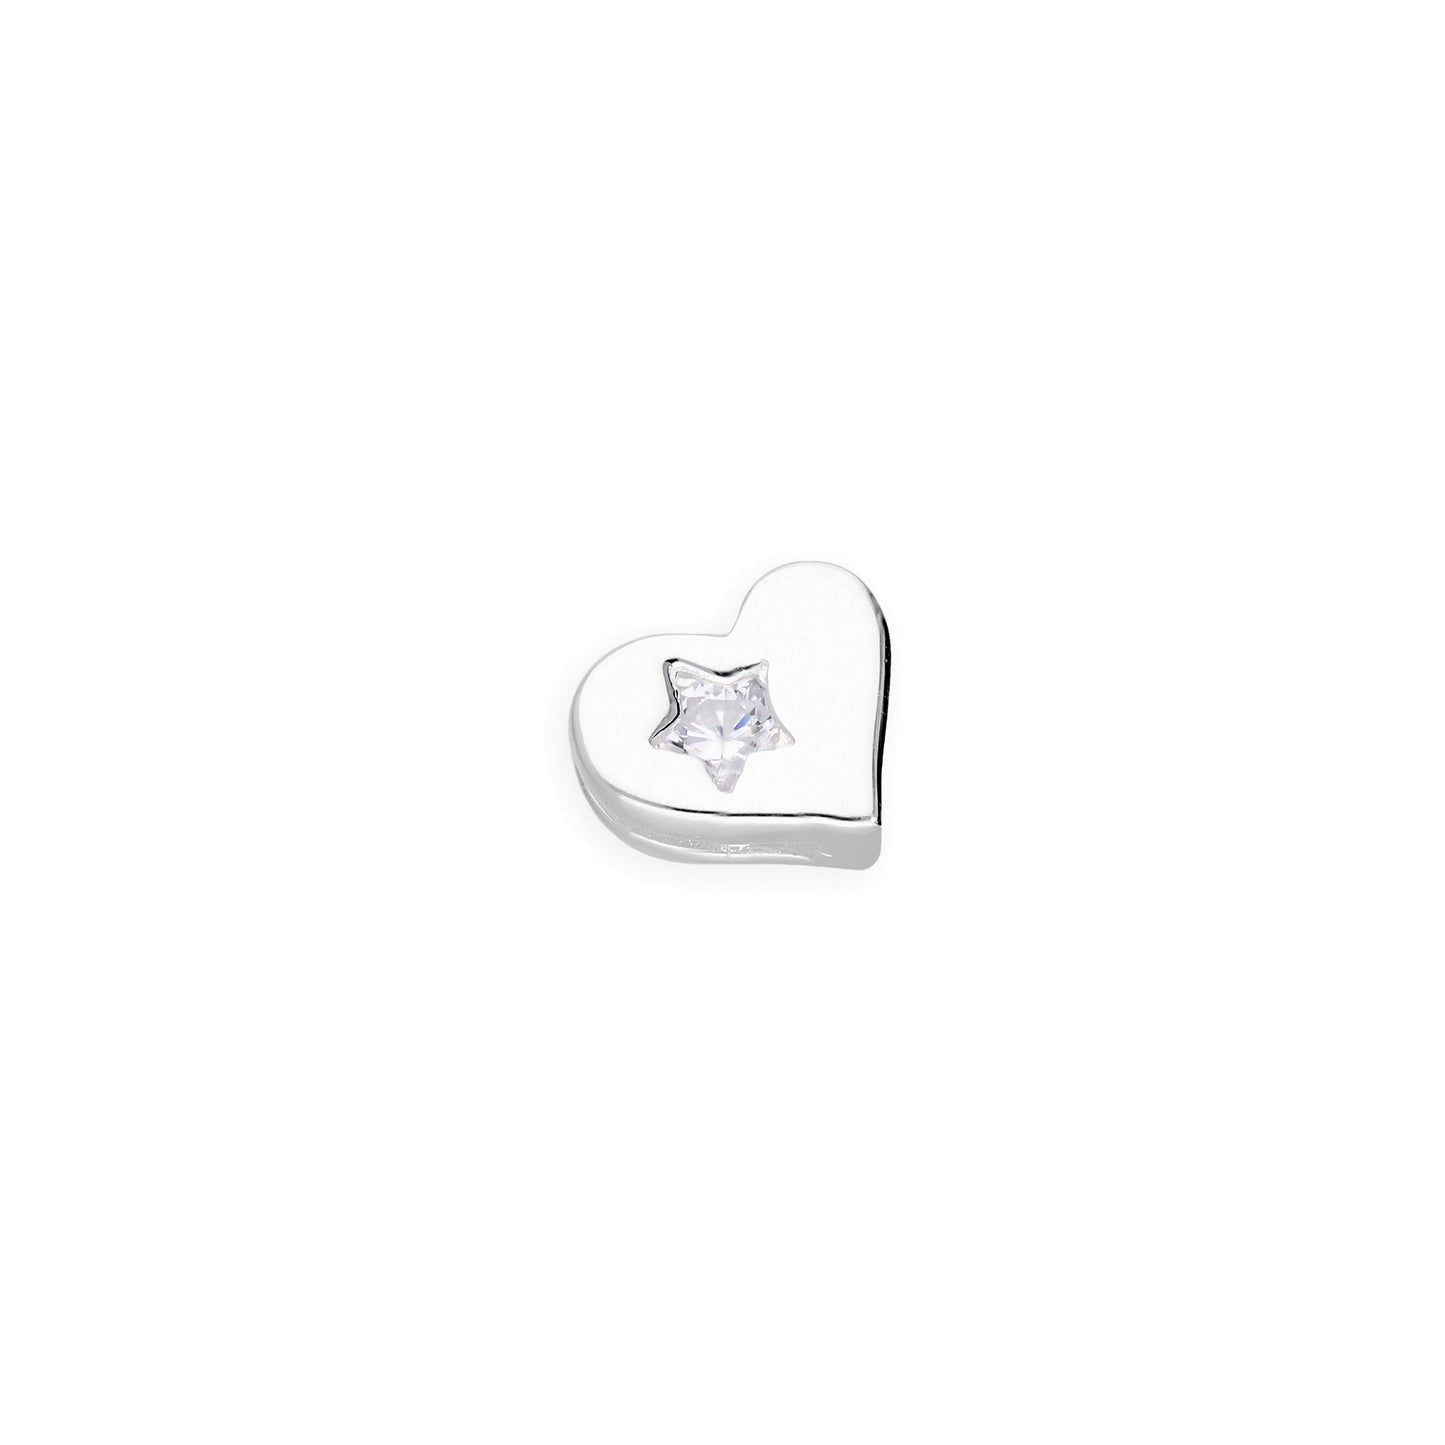 Sterling Silver Floating Heart Charm w Clear CZ Crystal Star